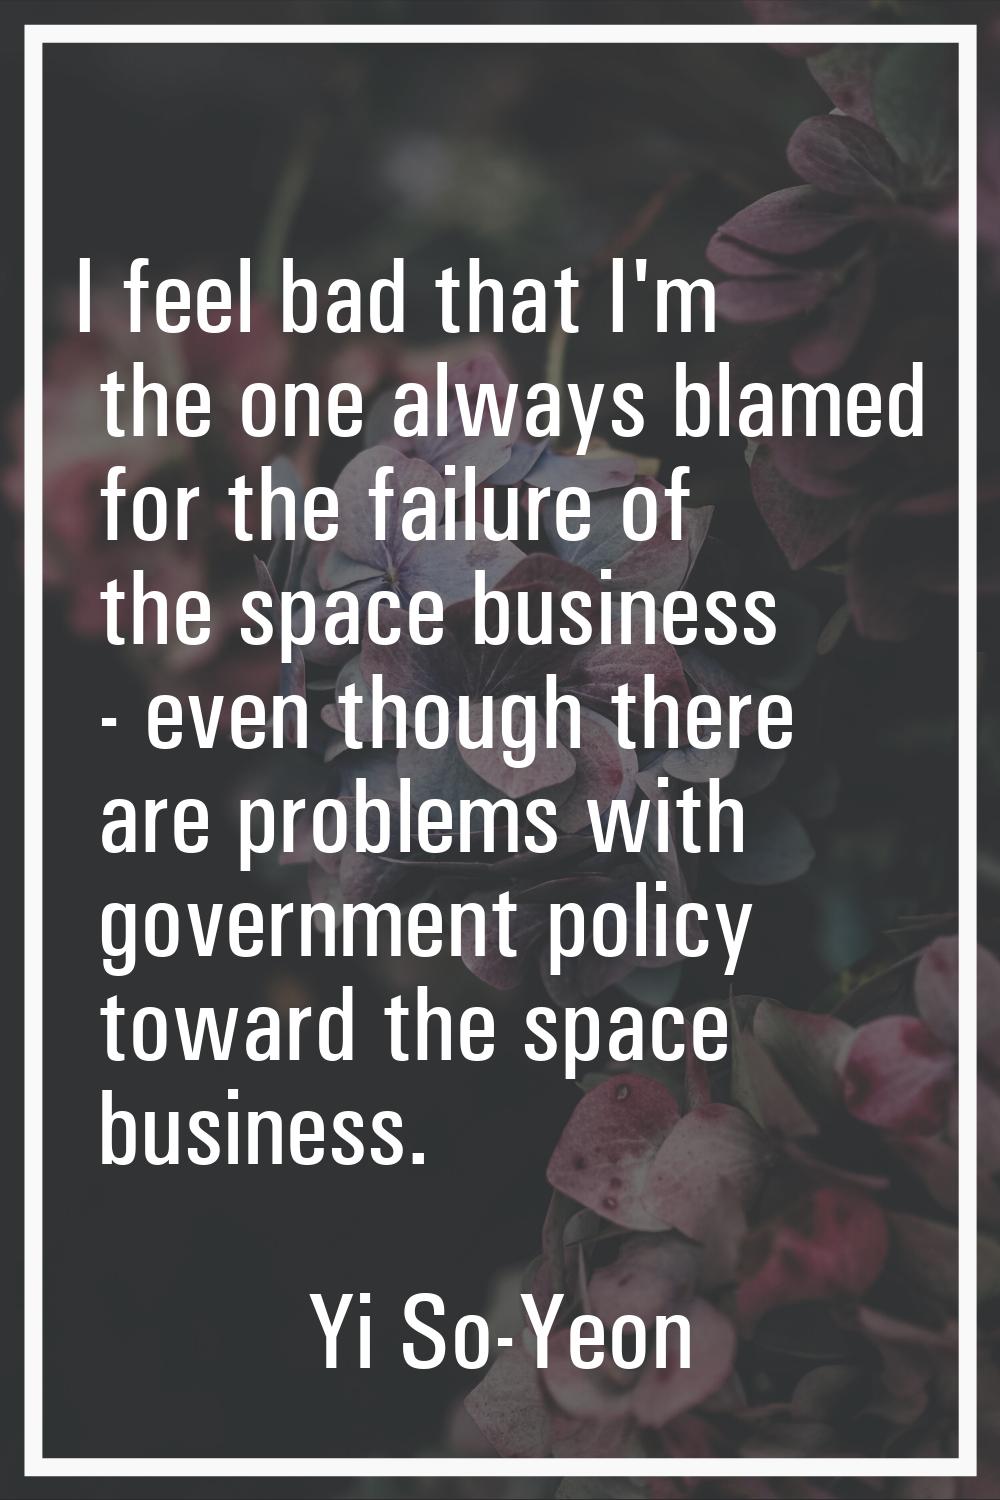 I feel bad that I'm the one always blamed for the failure of the space business - even though there